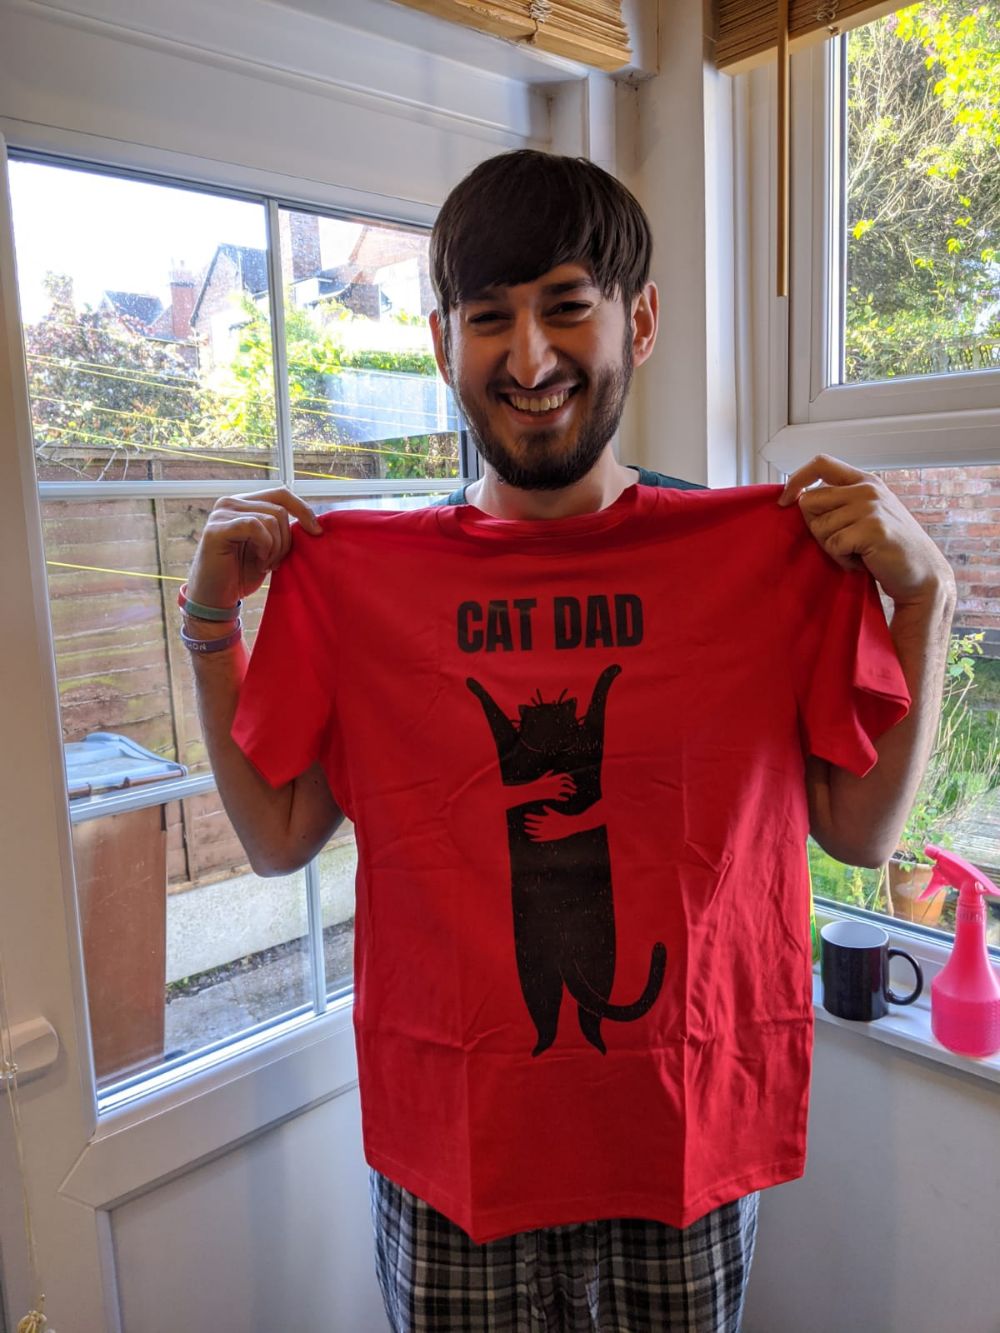 Jamie holding up a red t-shirt with a black cat being cuddled (seemingly against its will) with a title "cat dad"